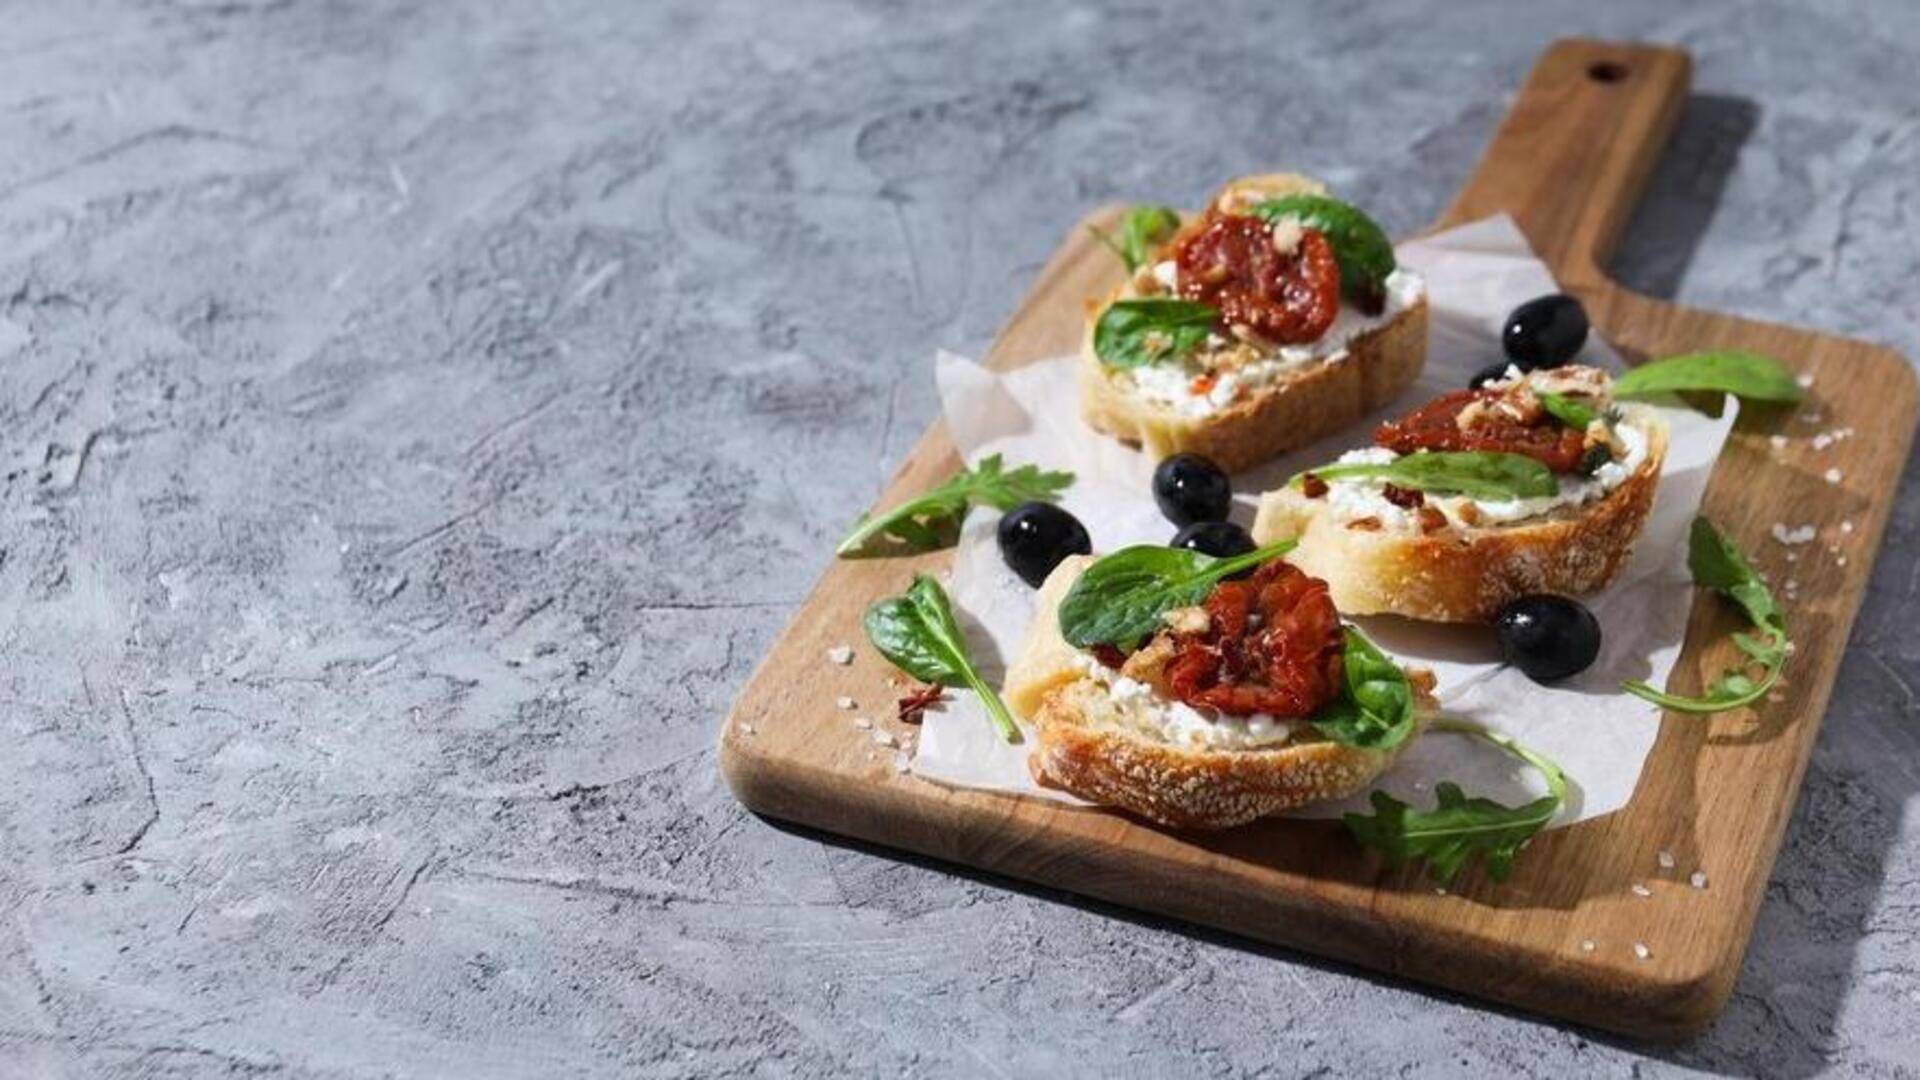 Impress your guests with this Tuscan white bean bruschetta recipe